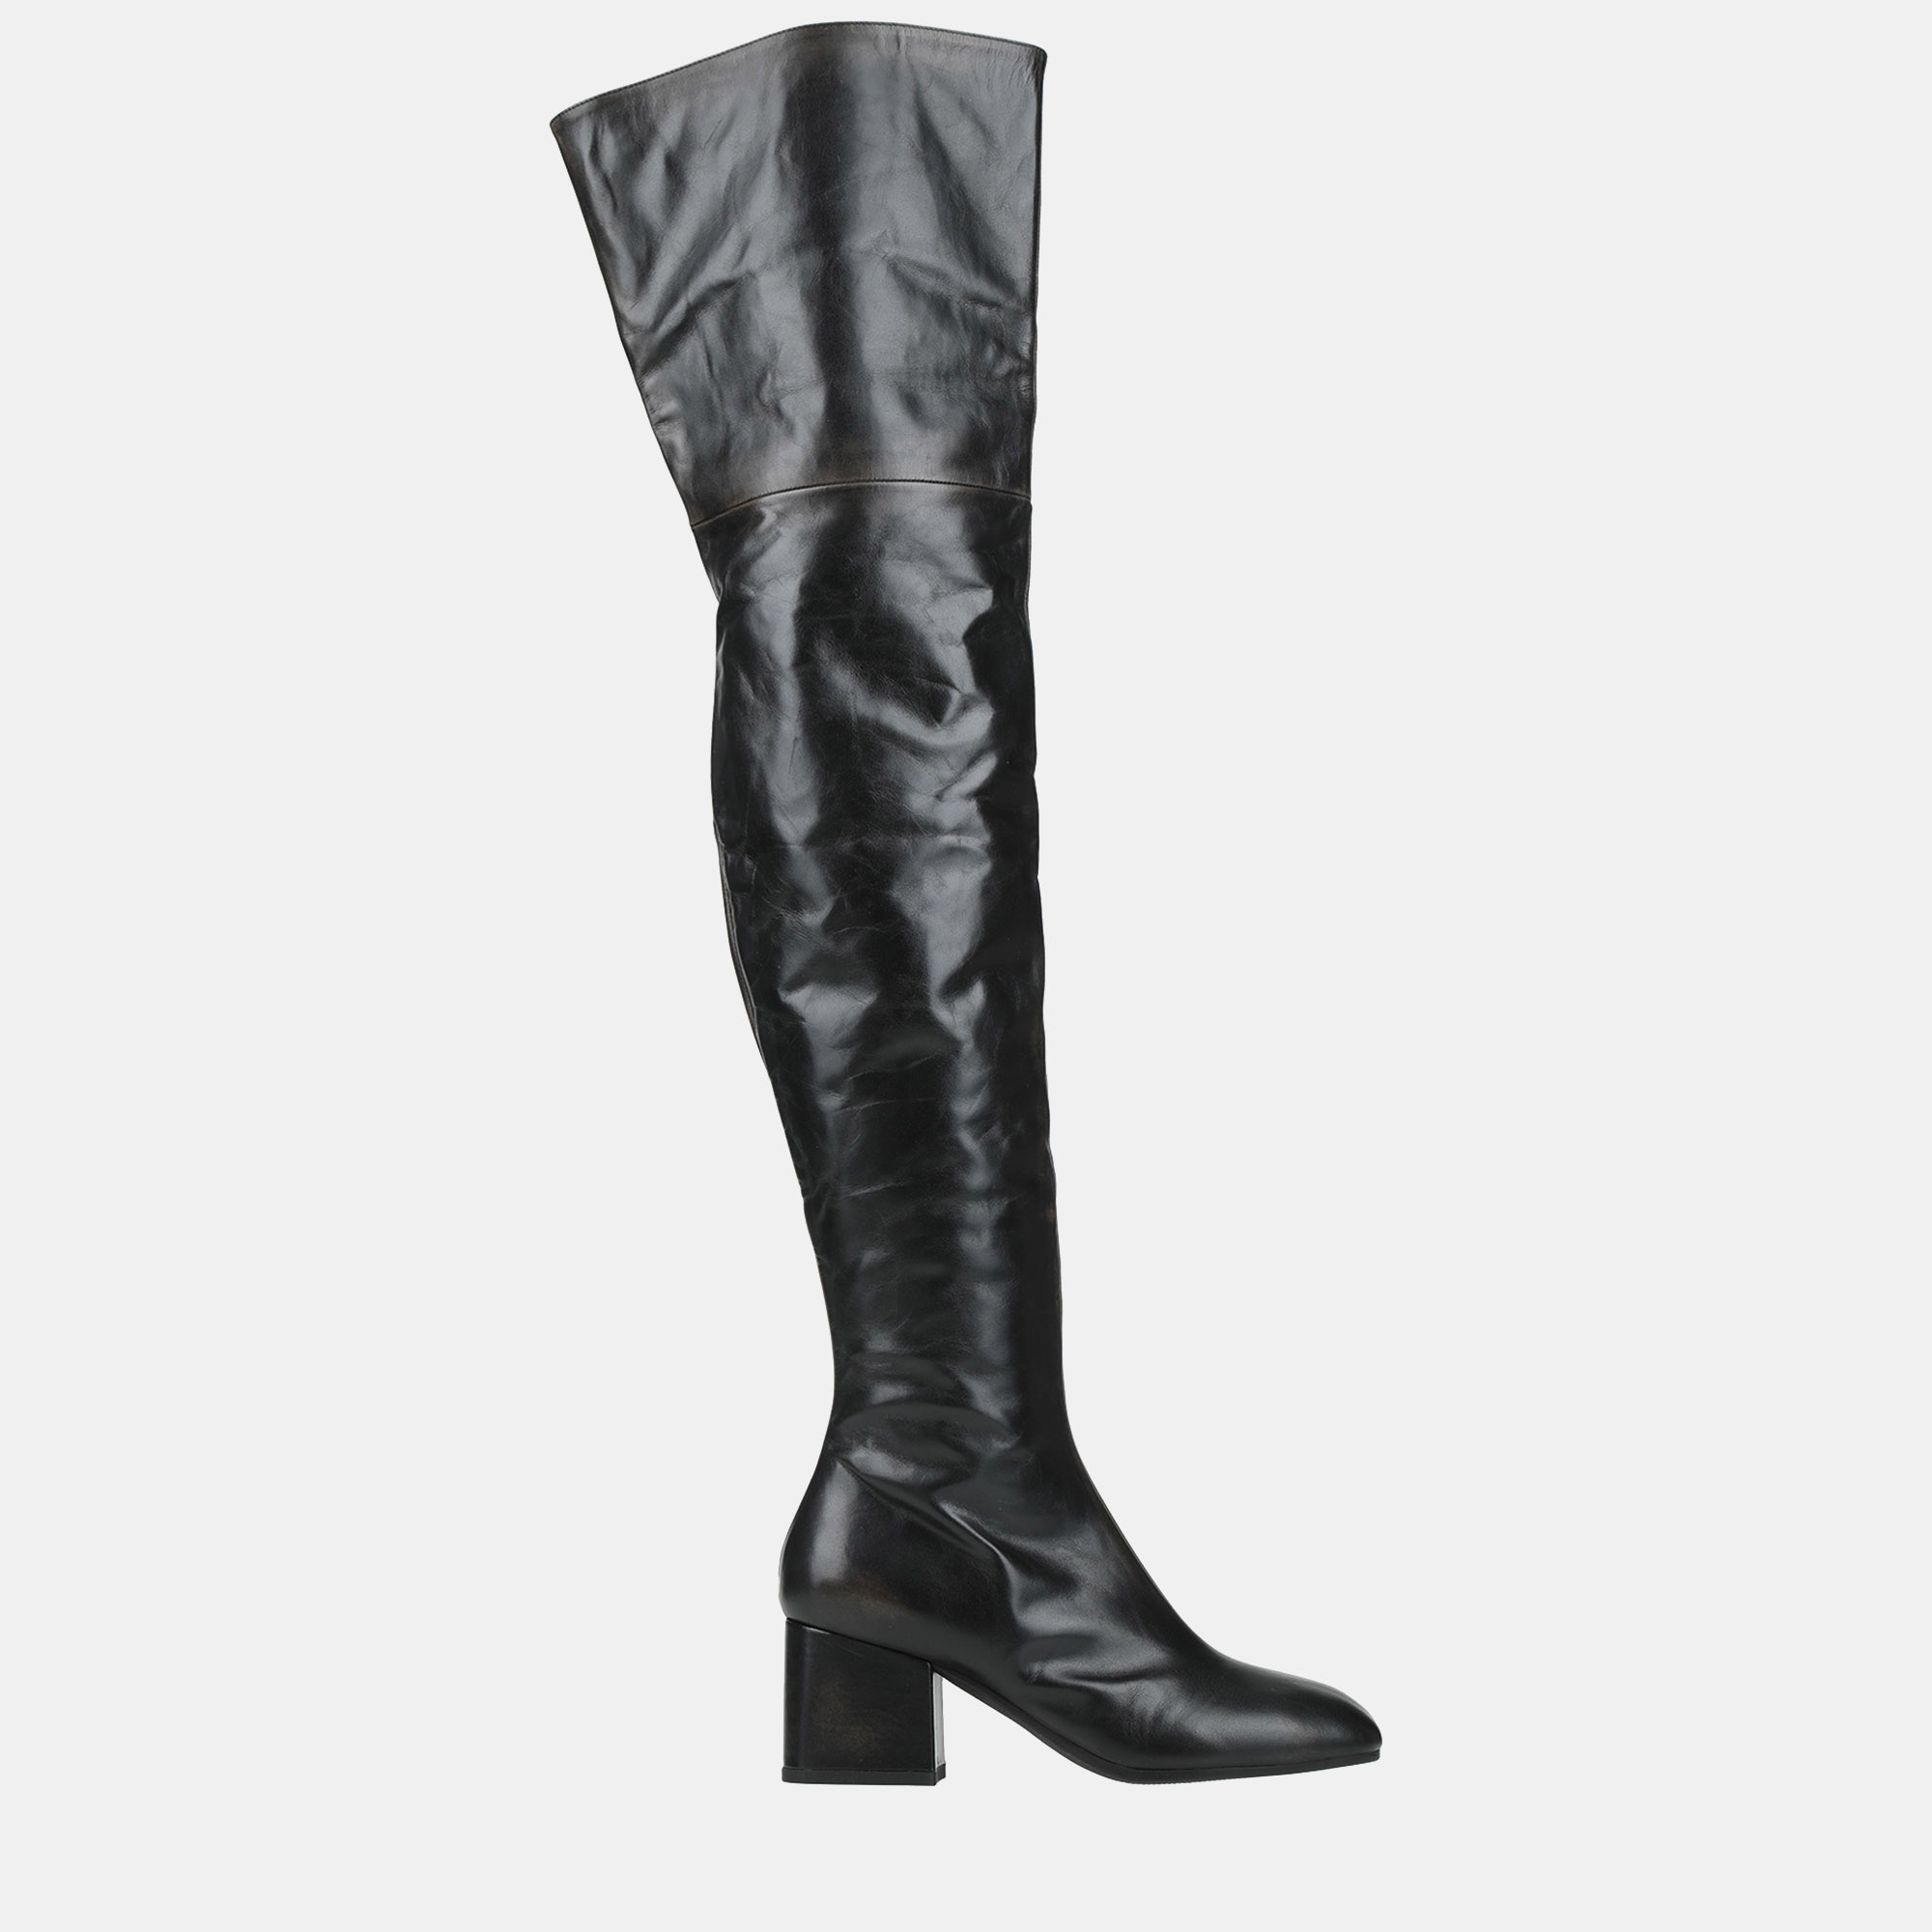 Marni leather over the knee boots size 36